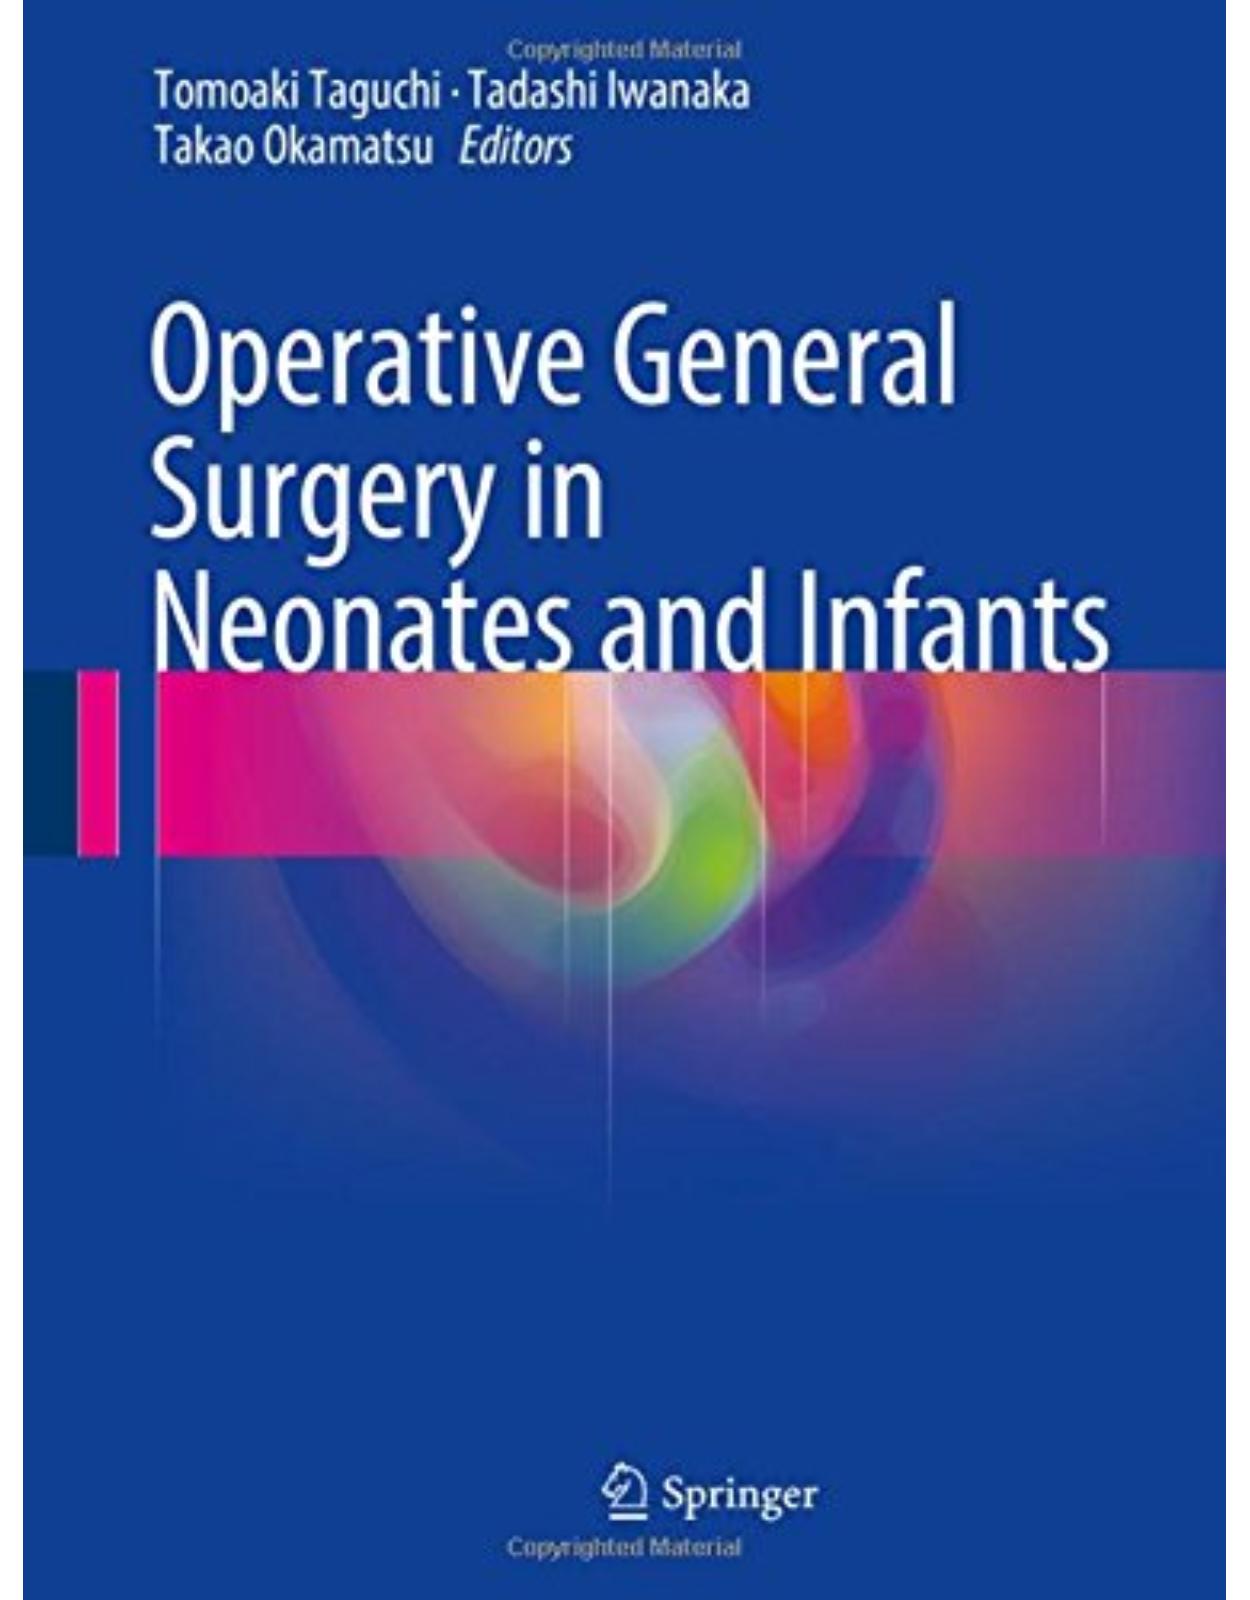 Operative General Surgery in Neonates and Infants